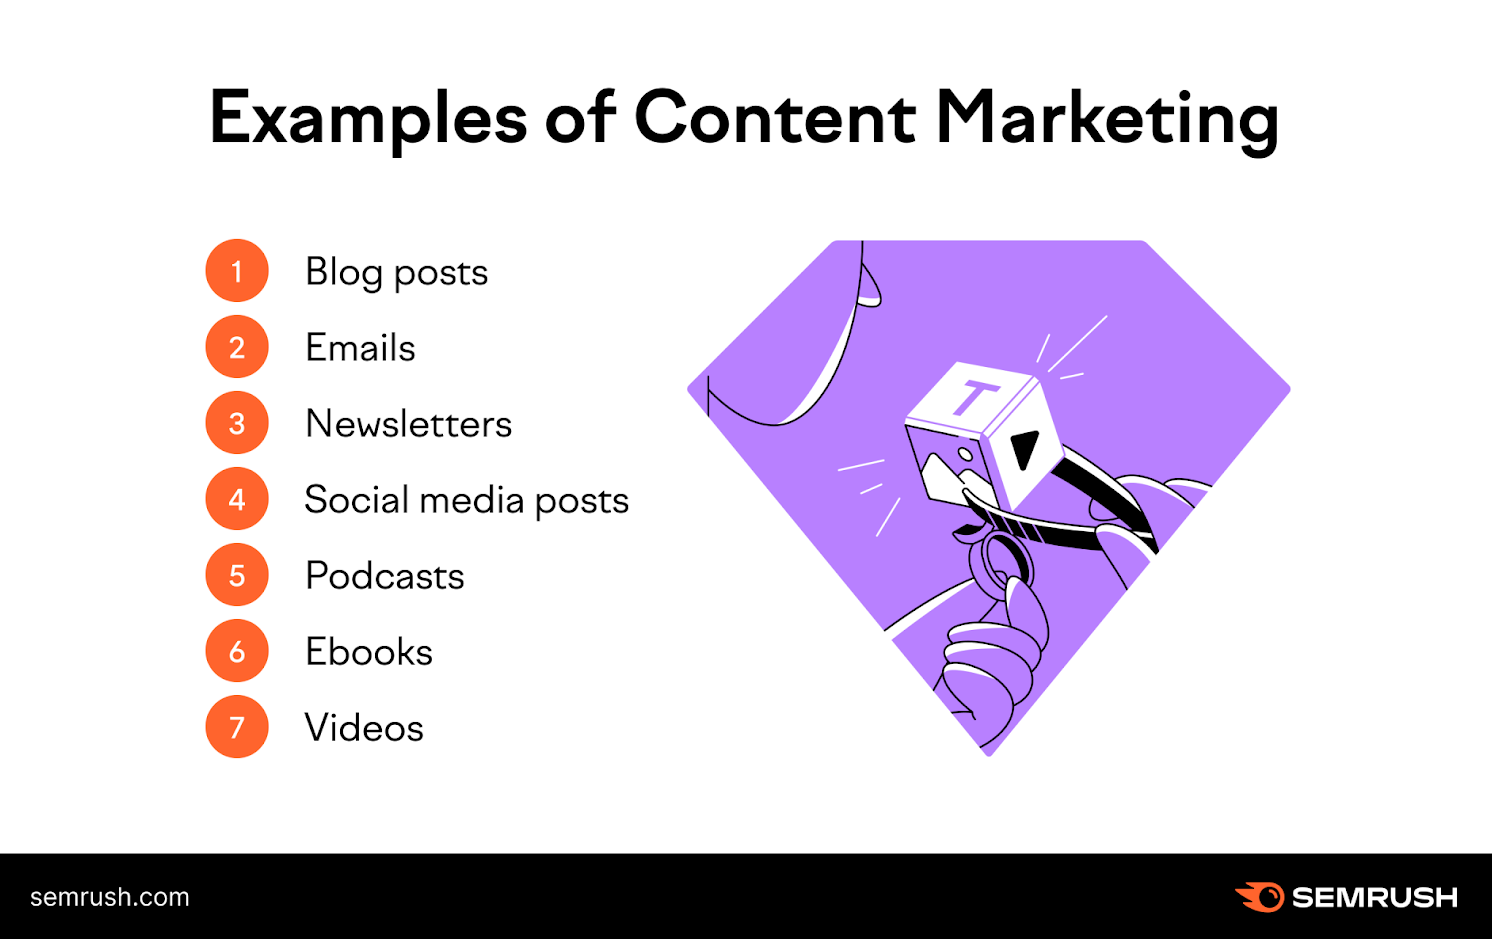 Examples of content marketing, including blog posts, emails, newsletters, social media posts, podcasts, ebooks and videos